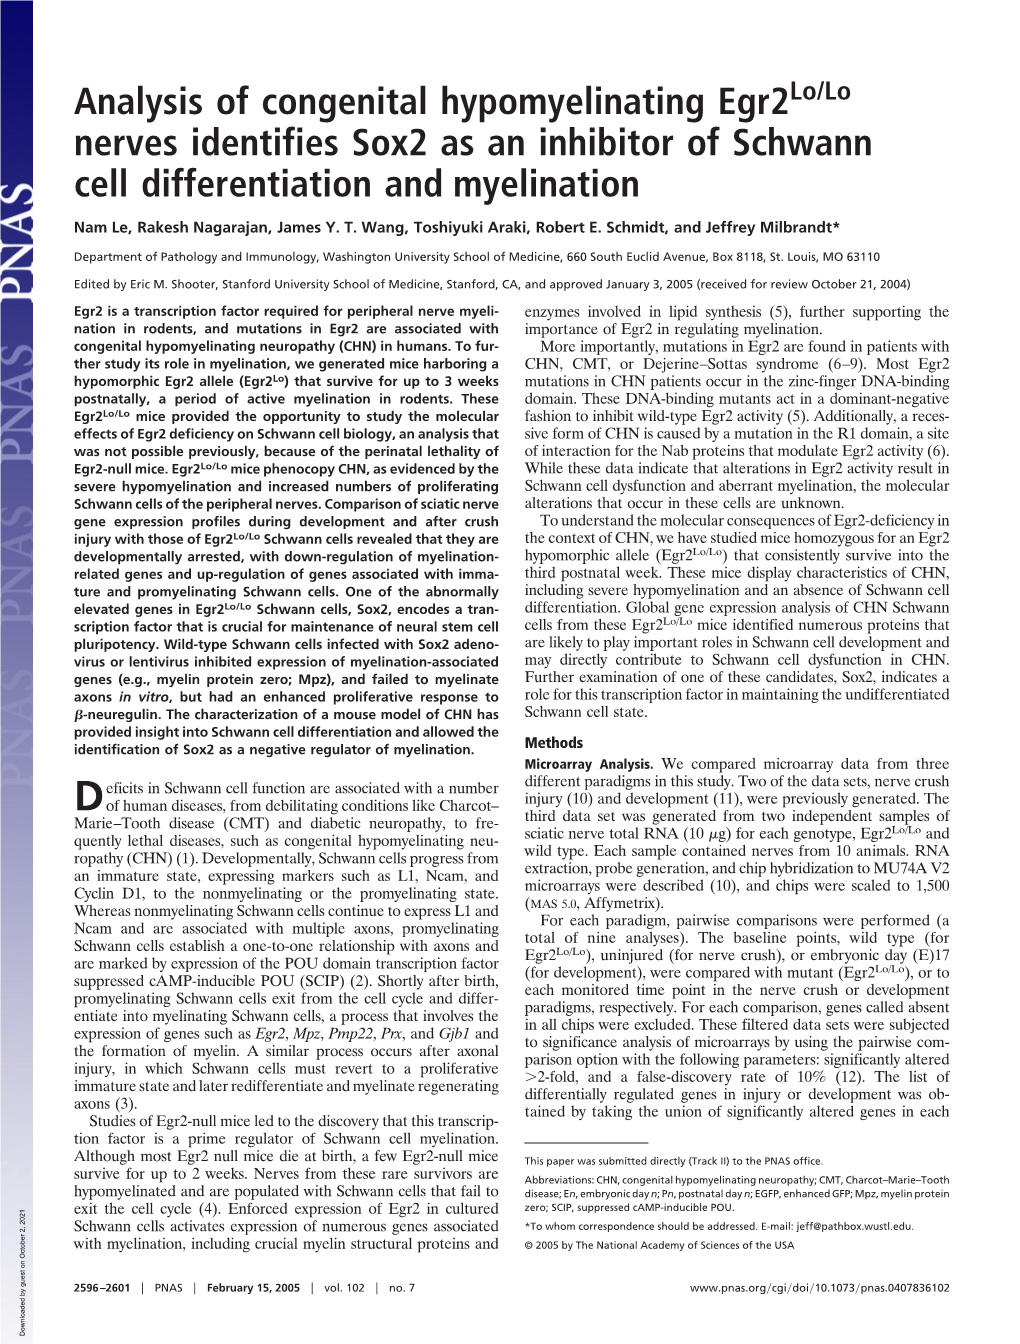 Nerves Identifies Sox2 As an Inhibitor of Schwann Cell Differentiation and Myelination